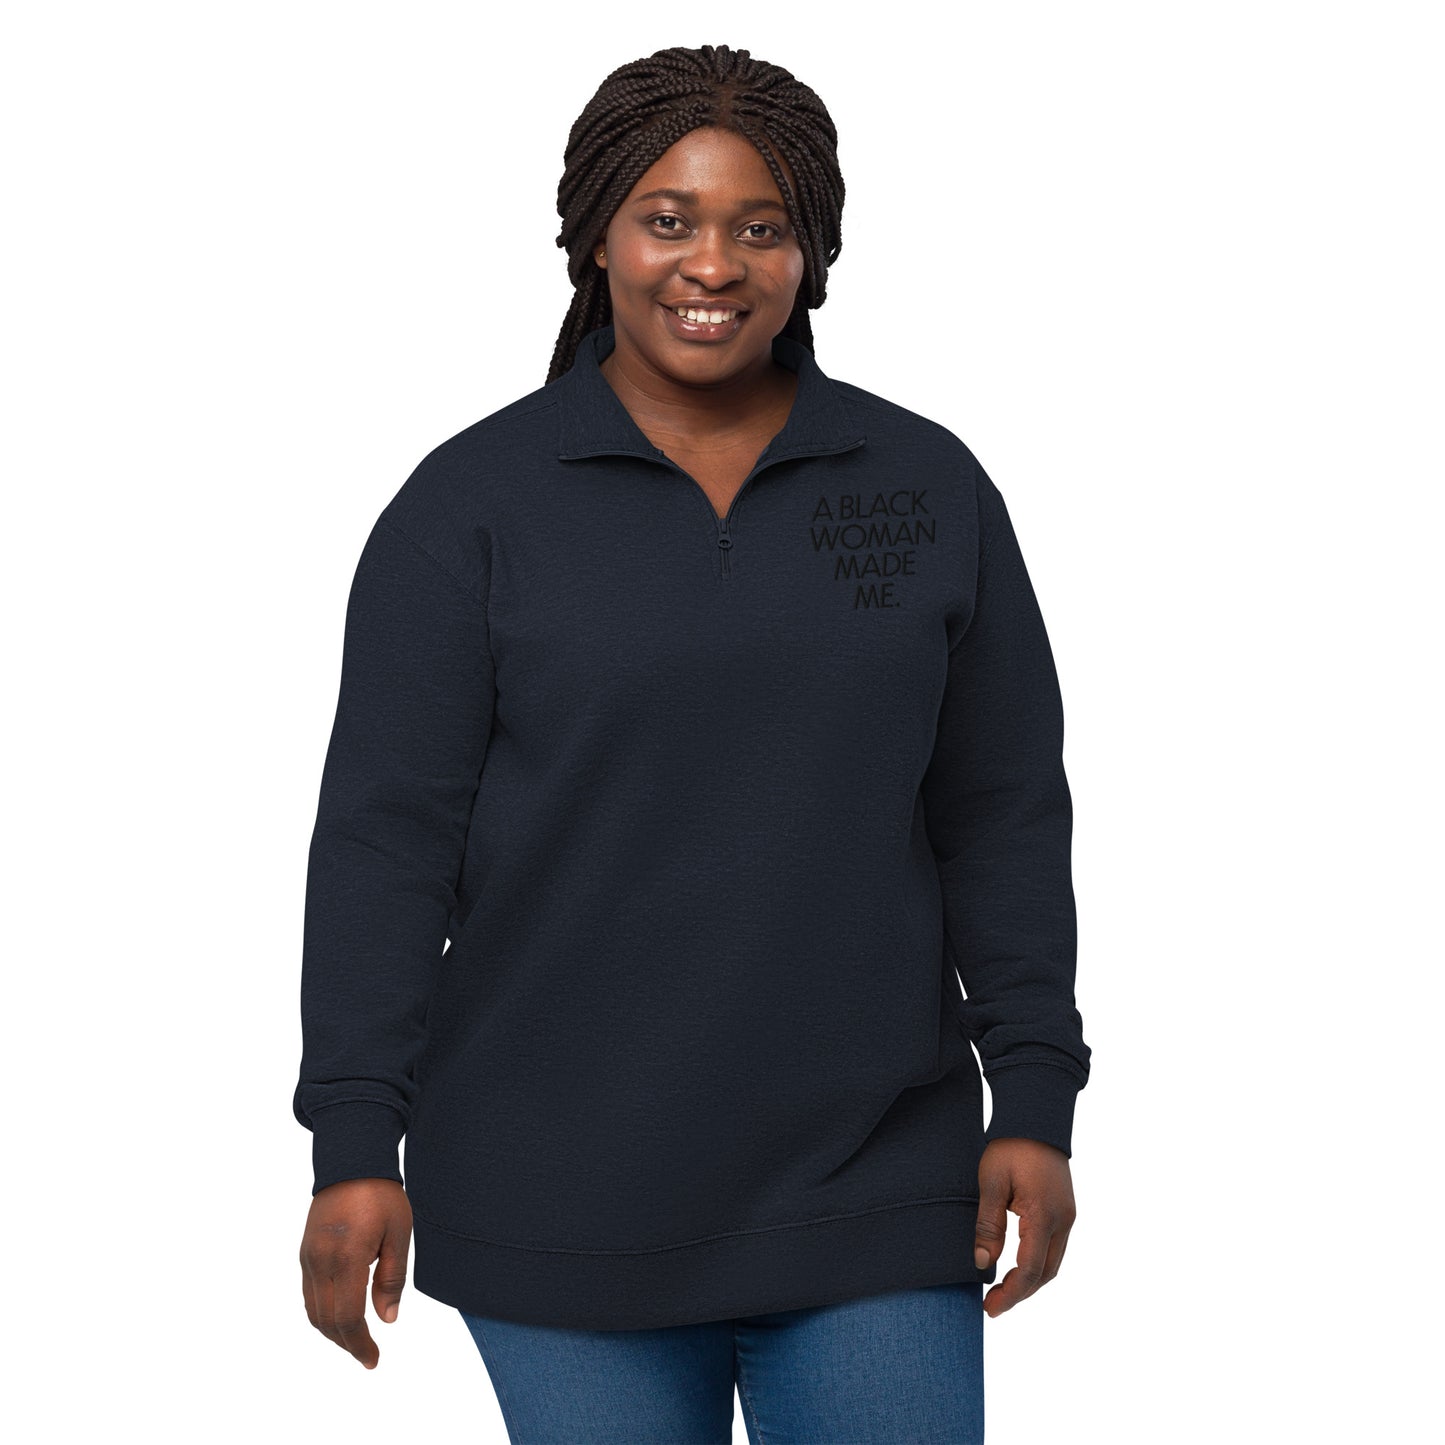 Embroidered Unisex fleece pullover - A Black Woman Made Me